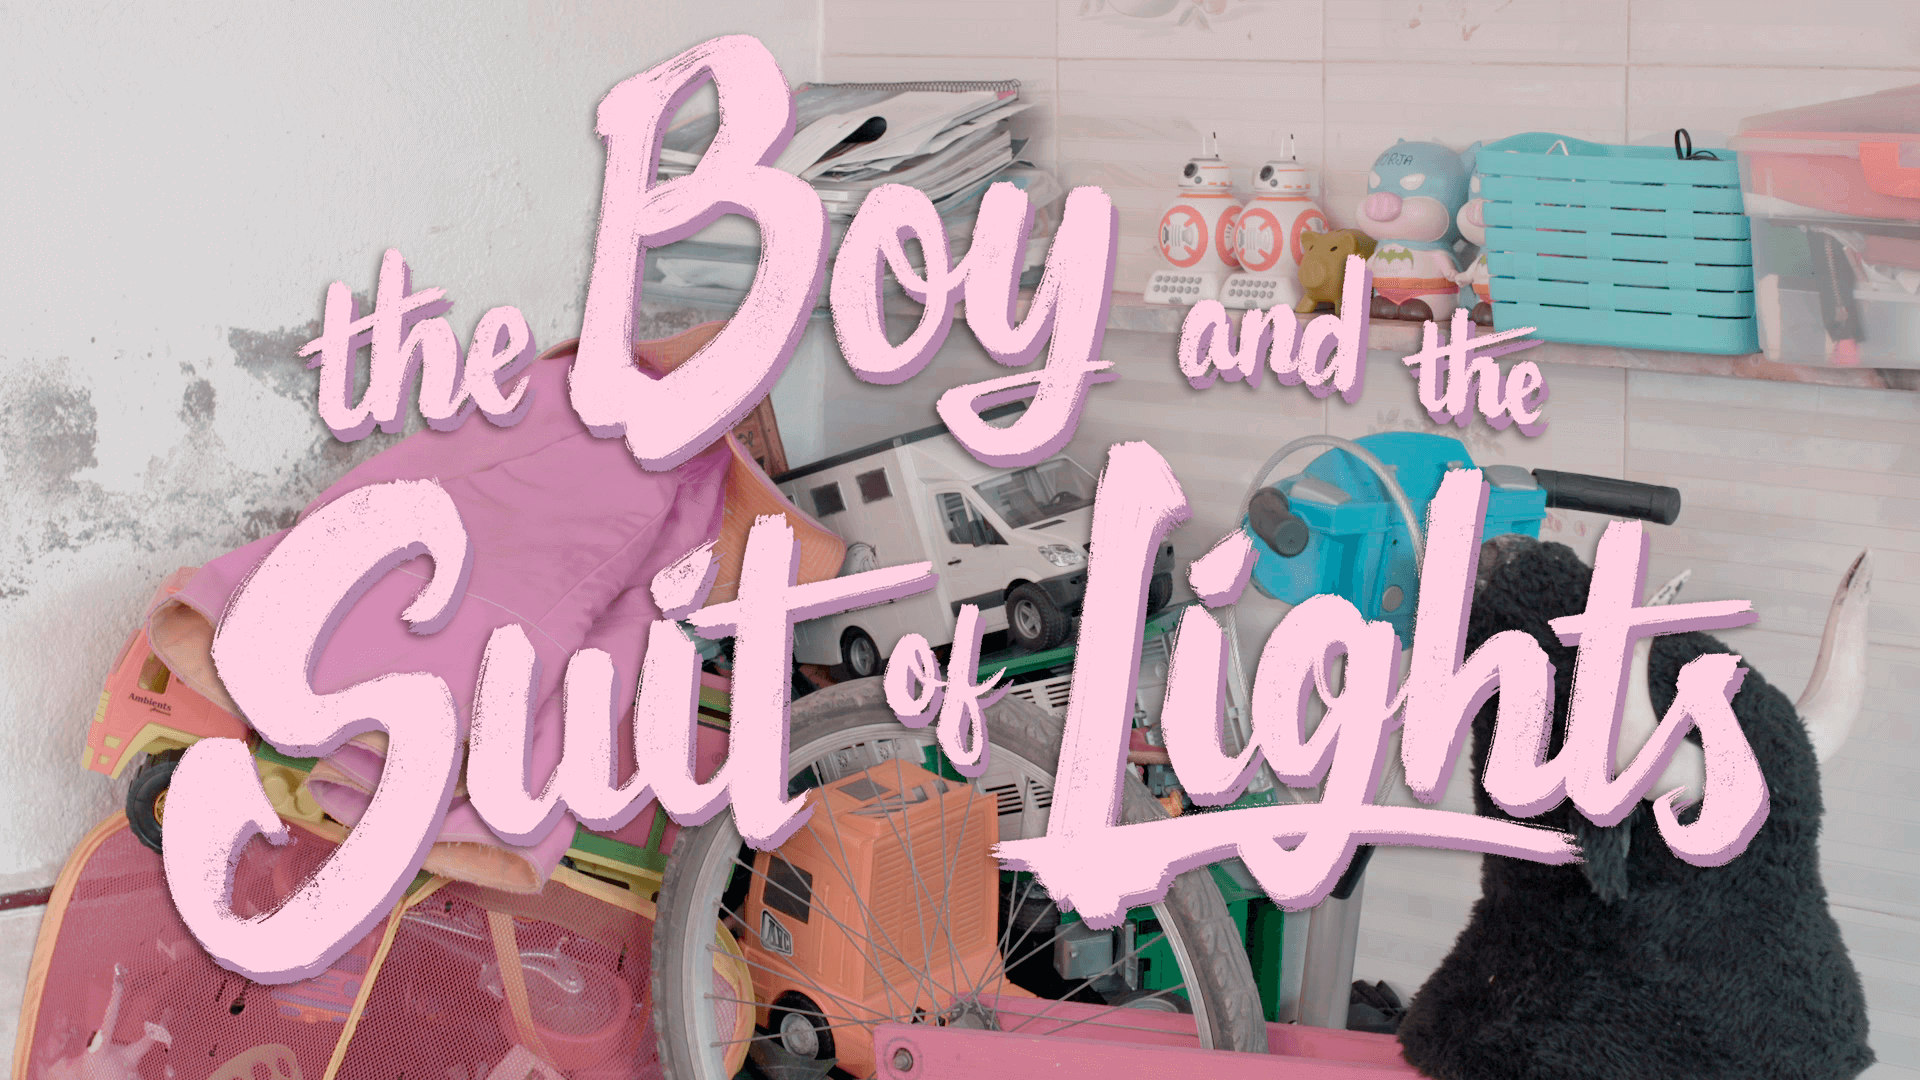 A photo of the graphic for The Boy and the Suit of Lights. The title is spelled out in pink cursive font over a pile of toys sitting in a white room.